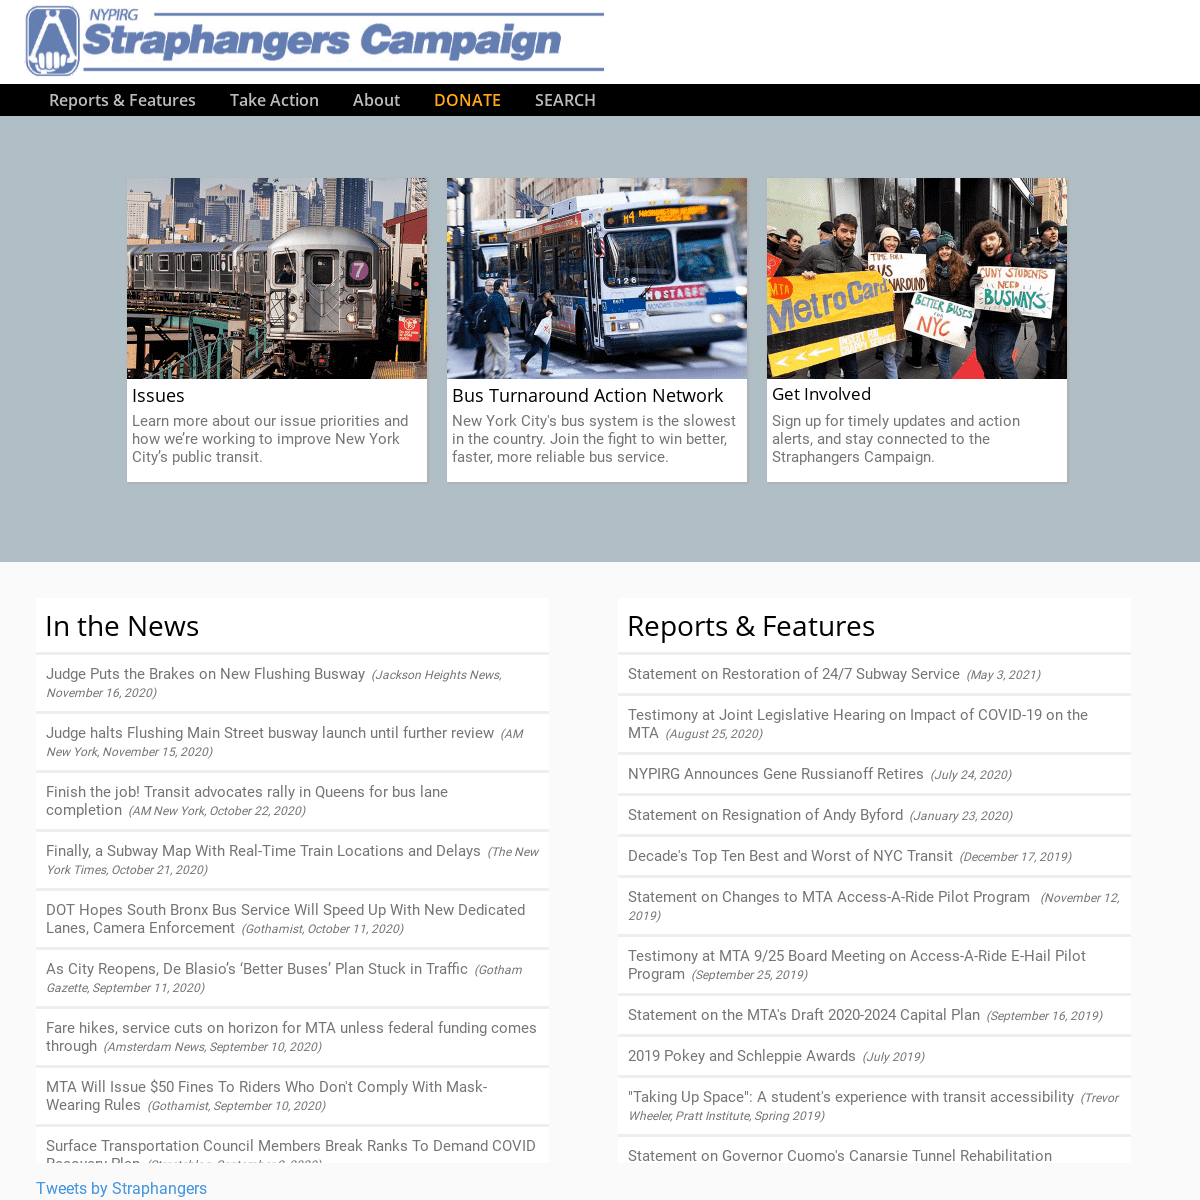 A complete backup of https://straphangers.org